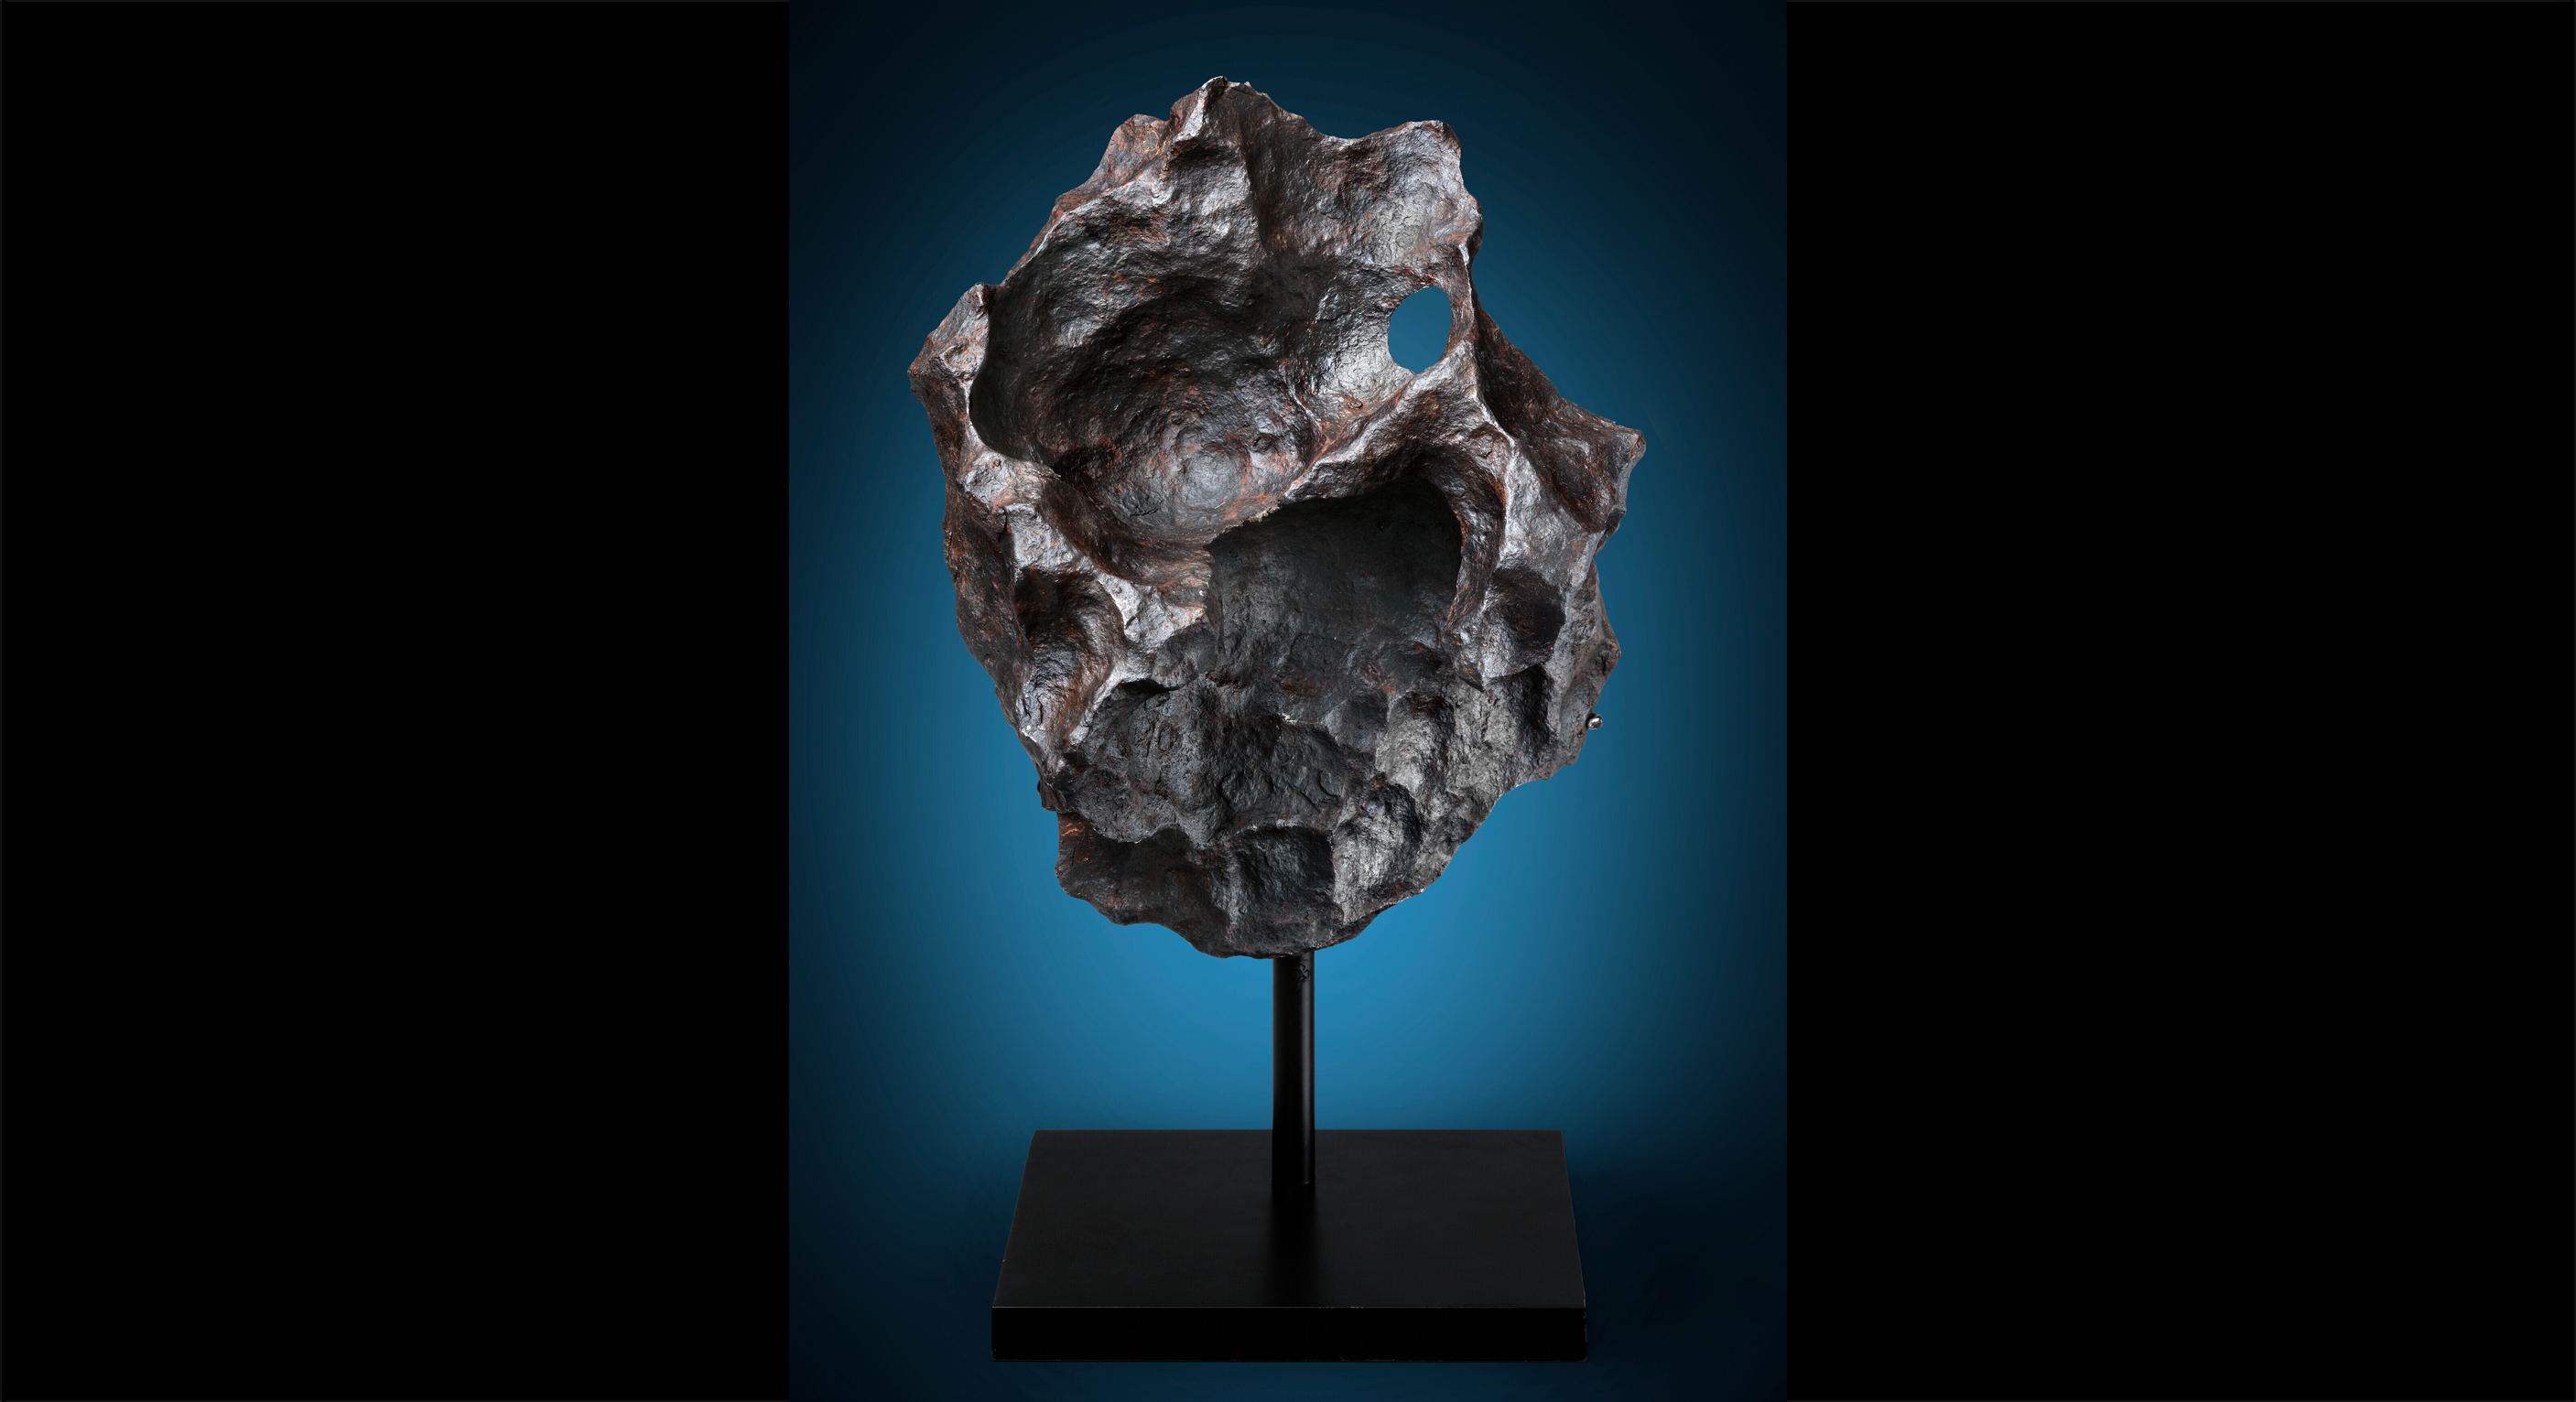 Gibeon meteorite, estimated at $120,000-$180,000. Image courtesy of Christie’s Images Ltd. 2023